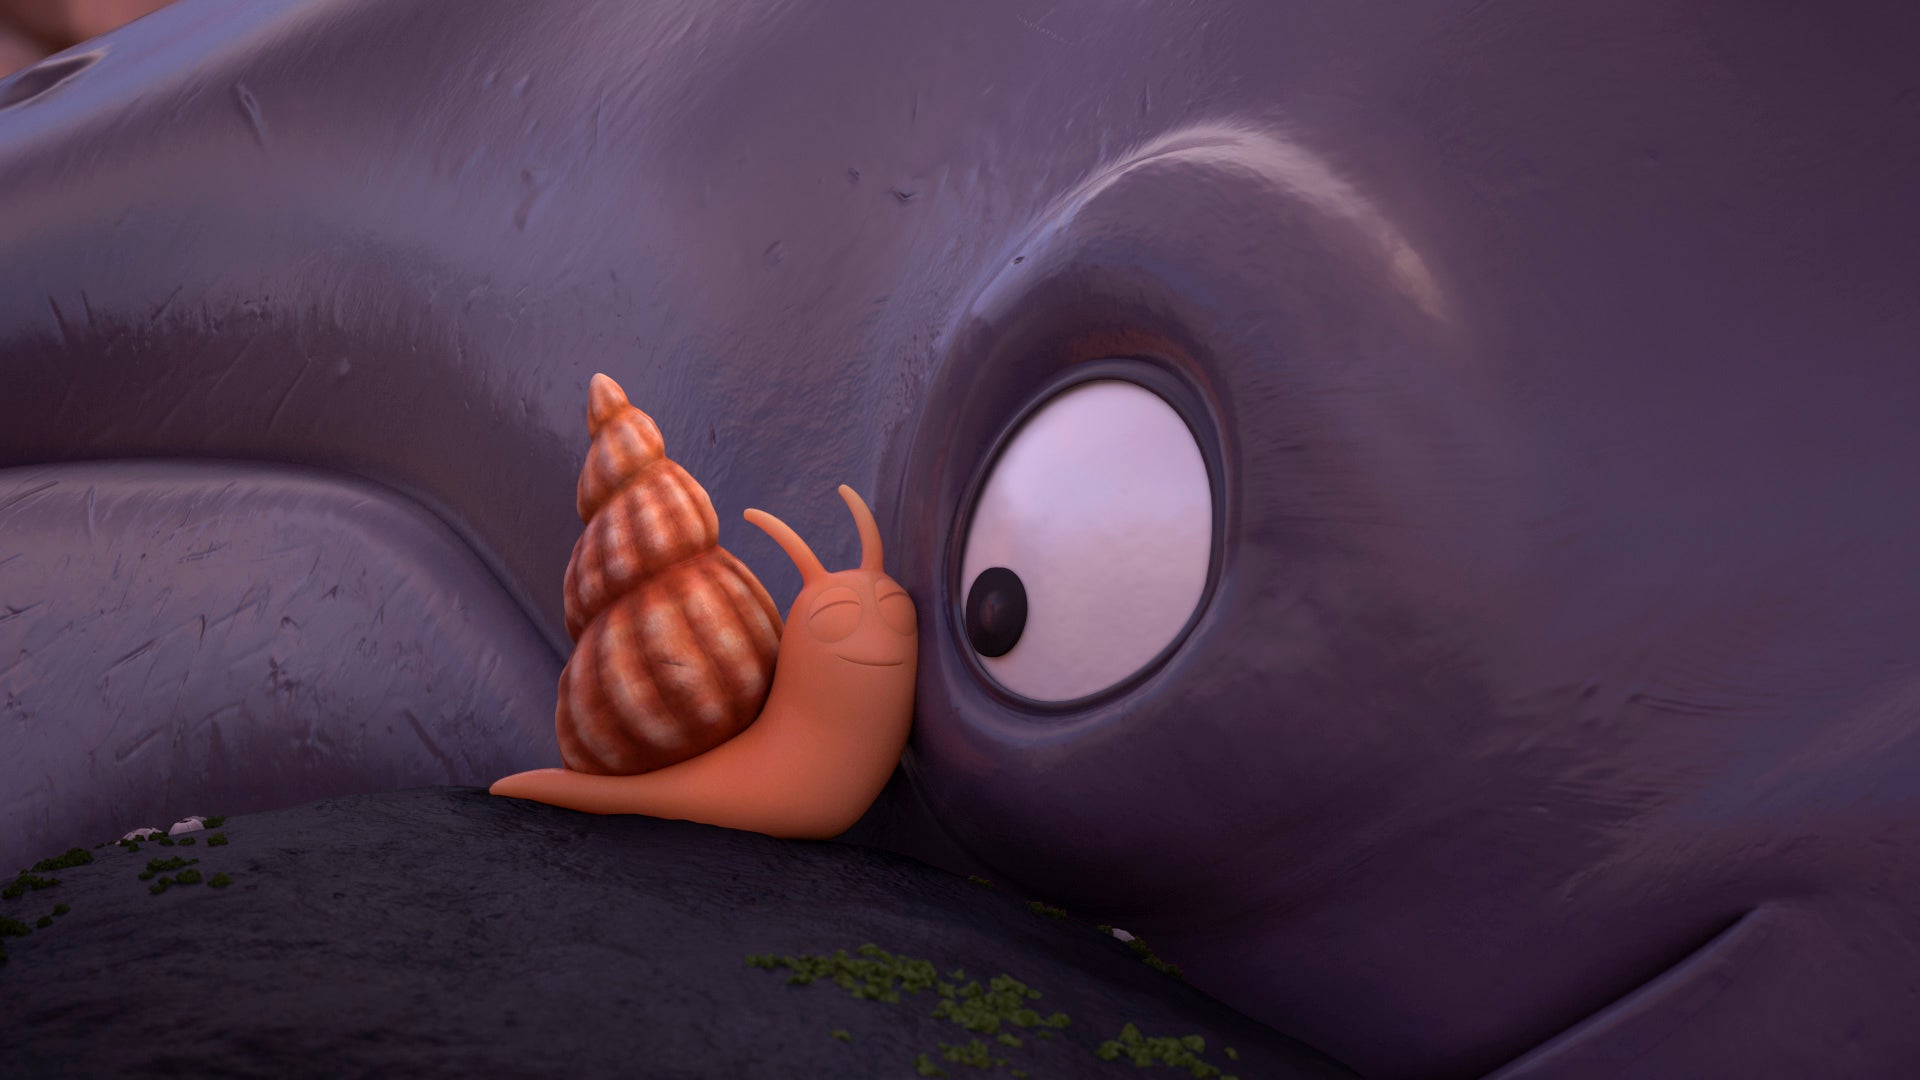 https://static.independent.co.uk/s3fs-public/thumbnails/image/2019/12/09/11/19435899-high-res-the-snail-and-the-whale.jpg